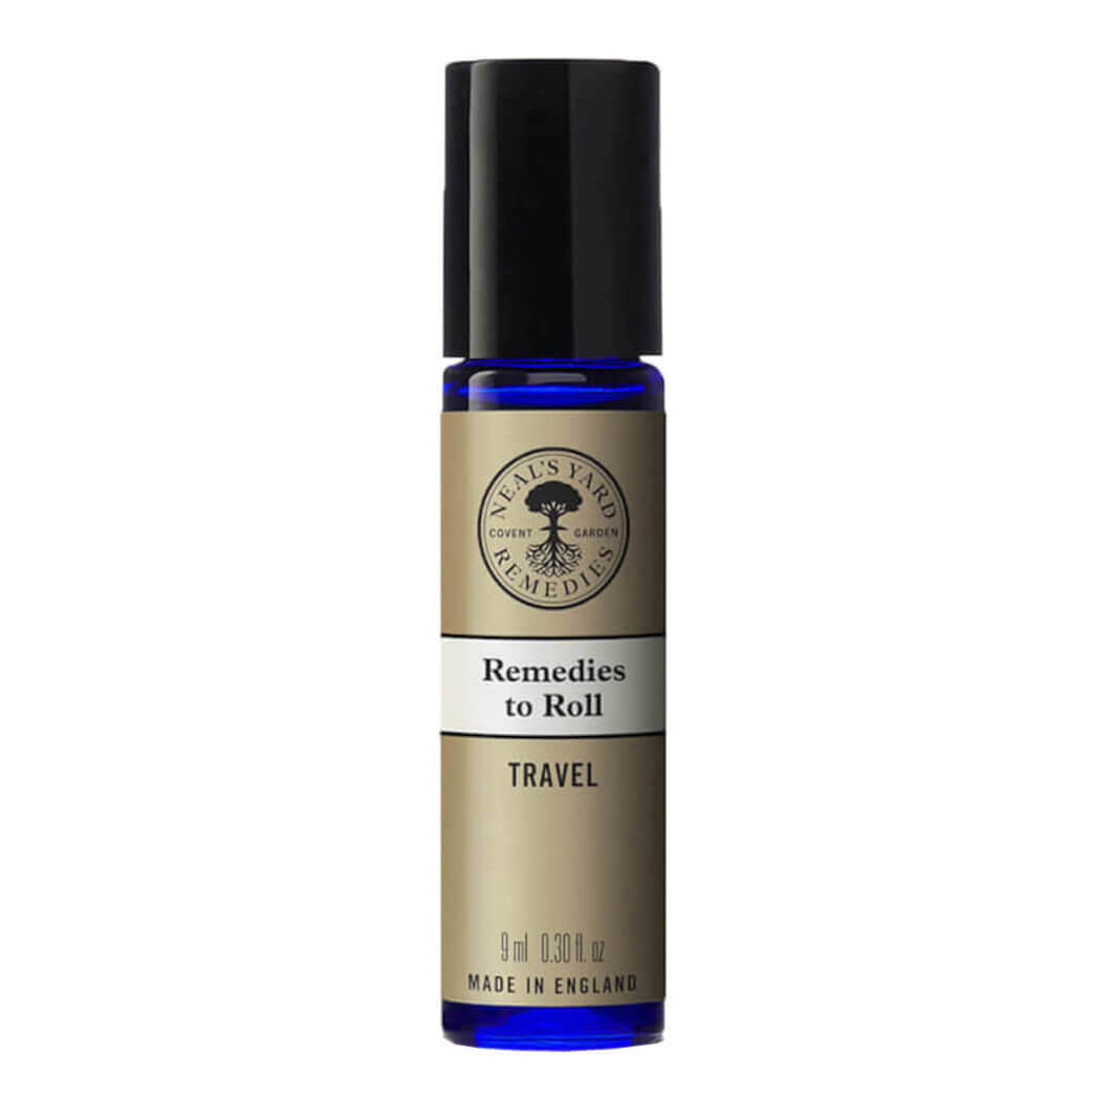 Neal's Yard Remedies Travel Remedies To Roll 9ml